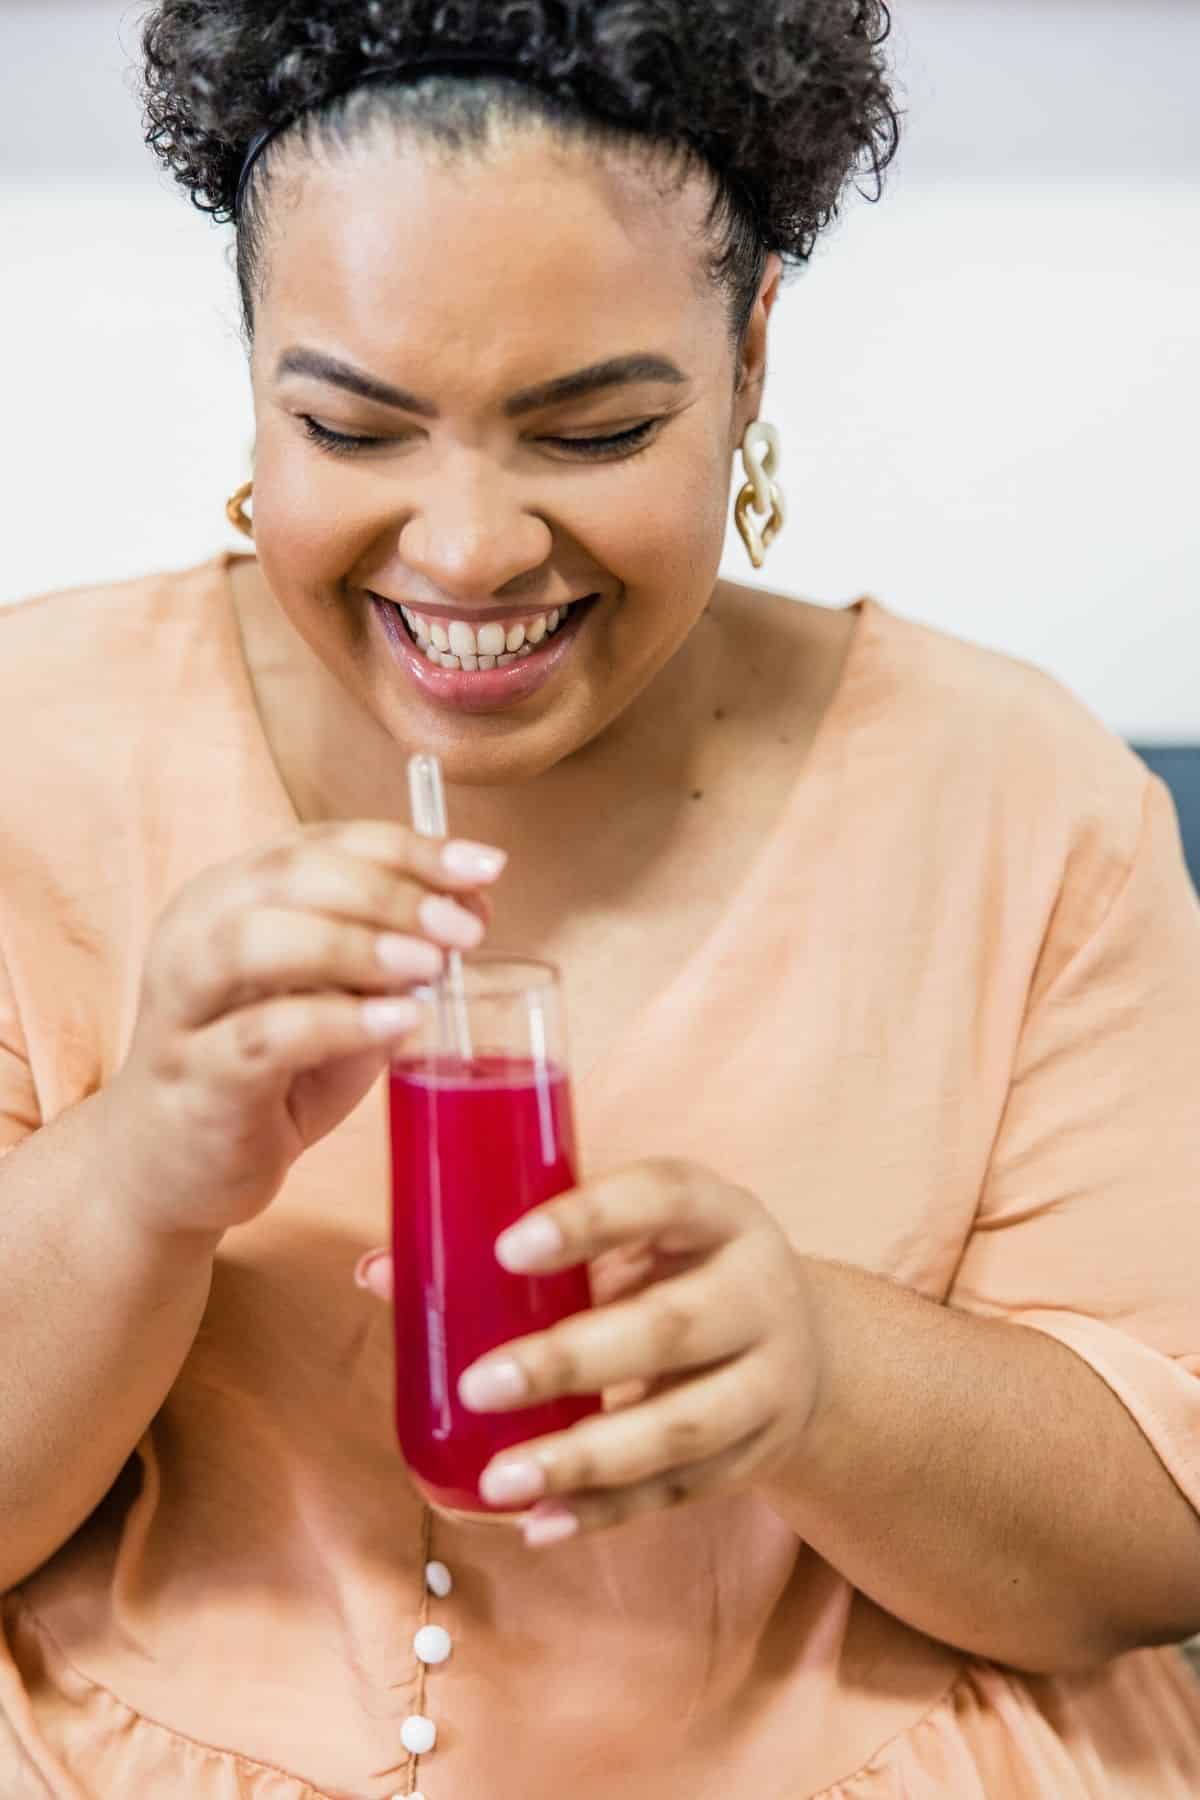 woman drinking a glass of beet juice.